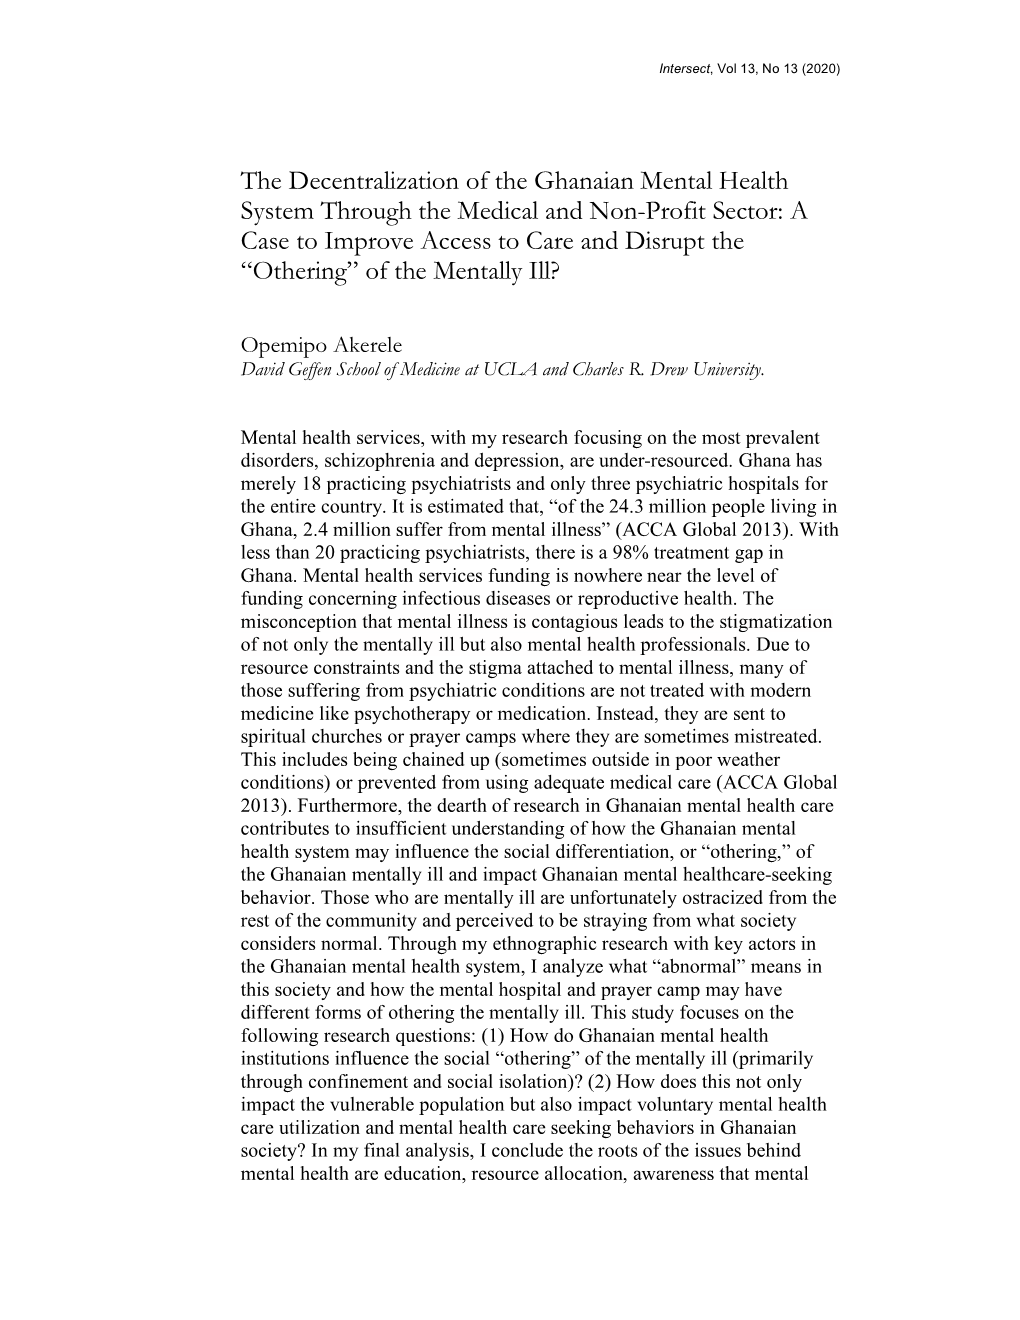 The Decentralization of the Ghanaian Mental Health System Through the Medical and Non-Profit Sector